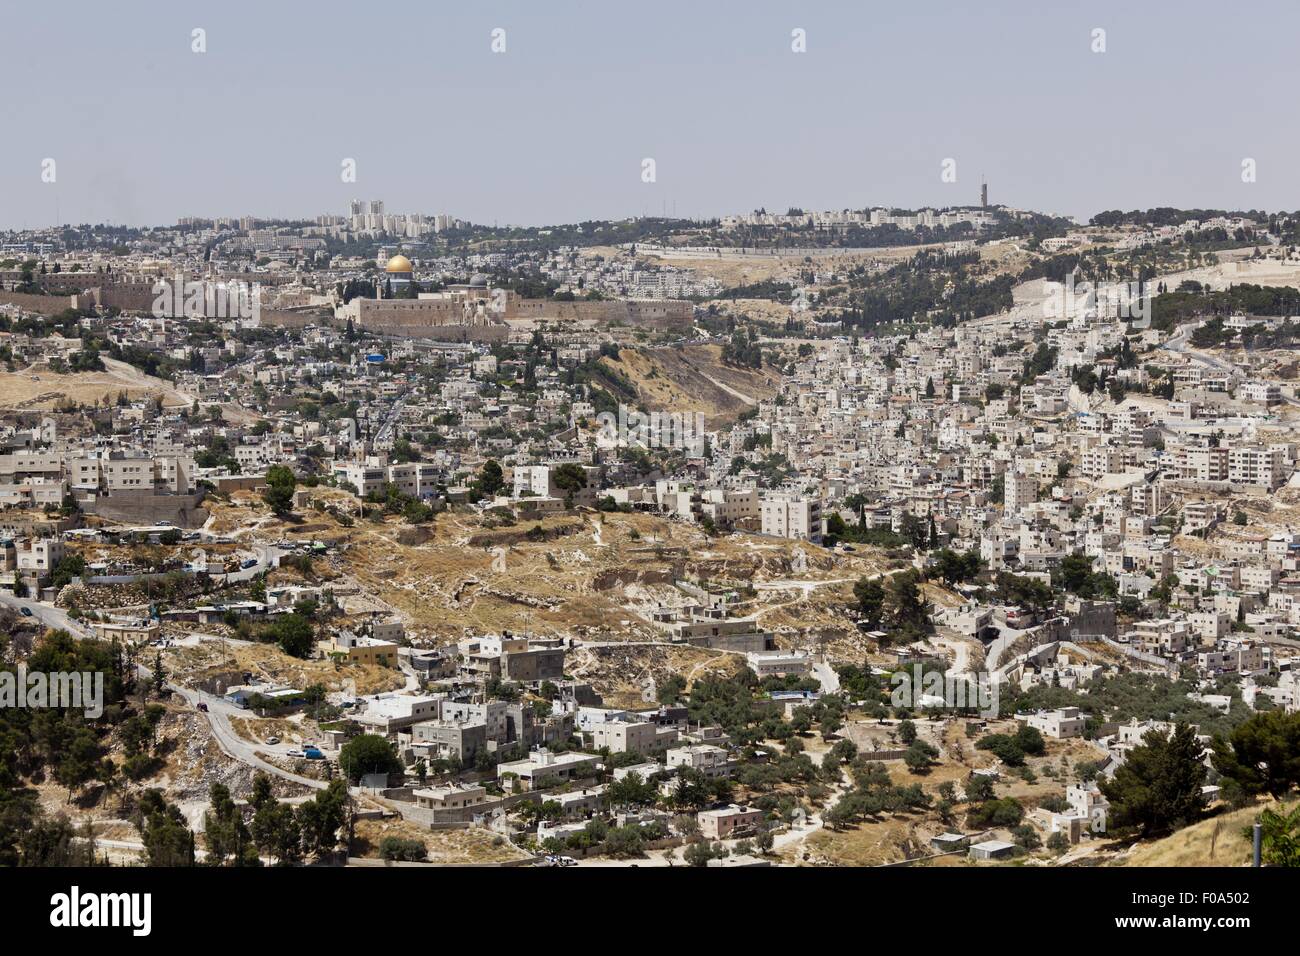 View of cityscape, Temple Mount, Dome of the Rock, and City Wall in Jerusalem, Israel Stock Photo